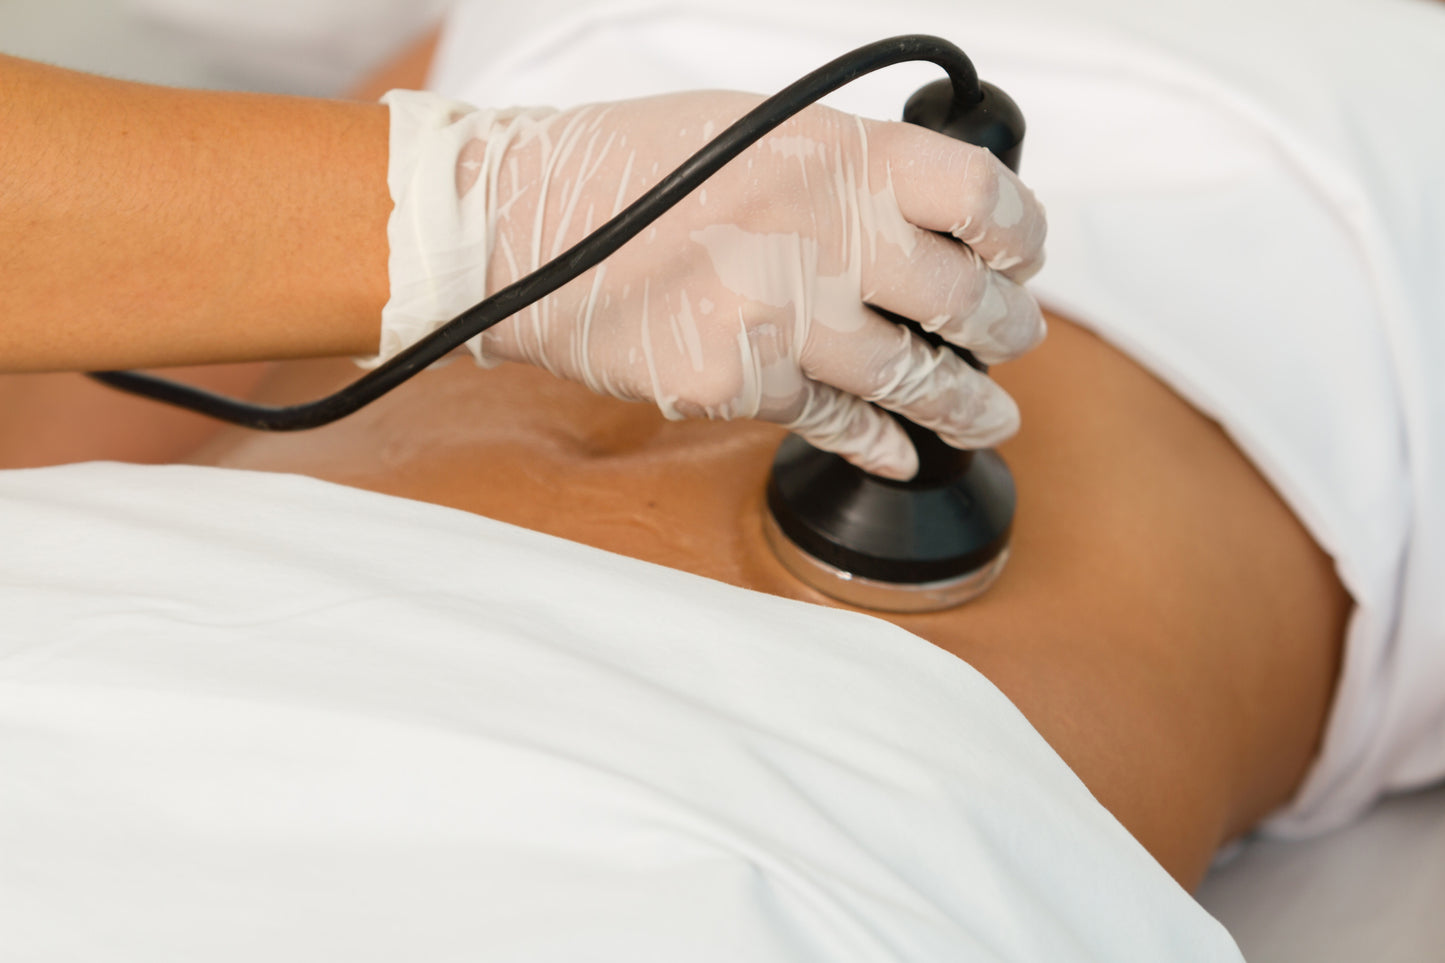 Body Contouring and Sculpting - Cavitation - EIGHT Session